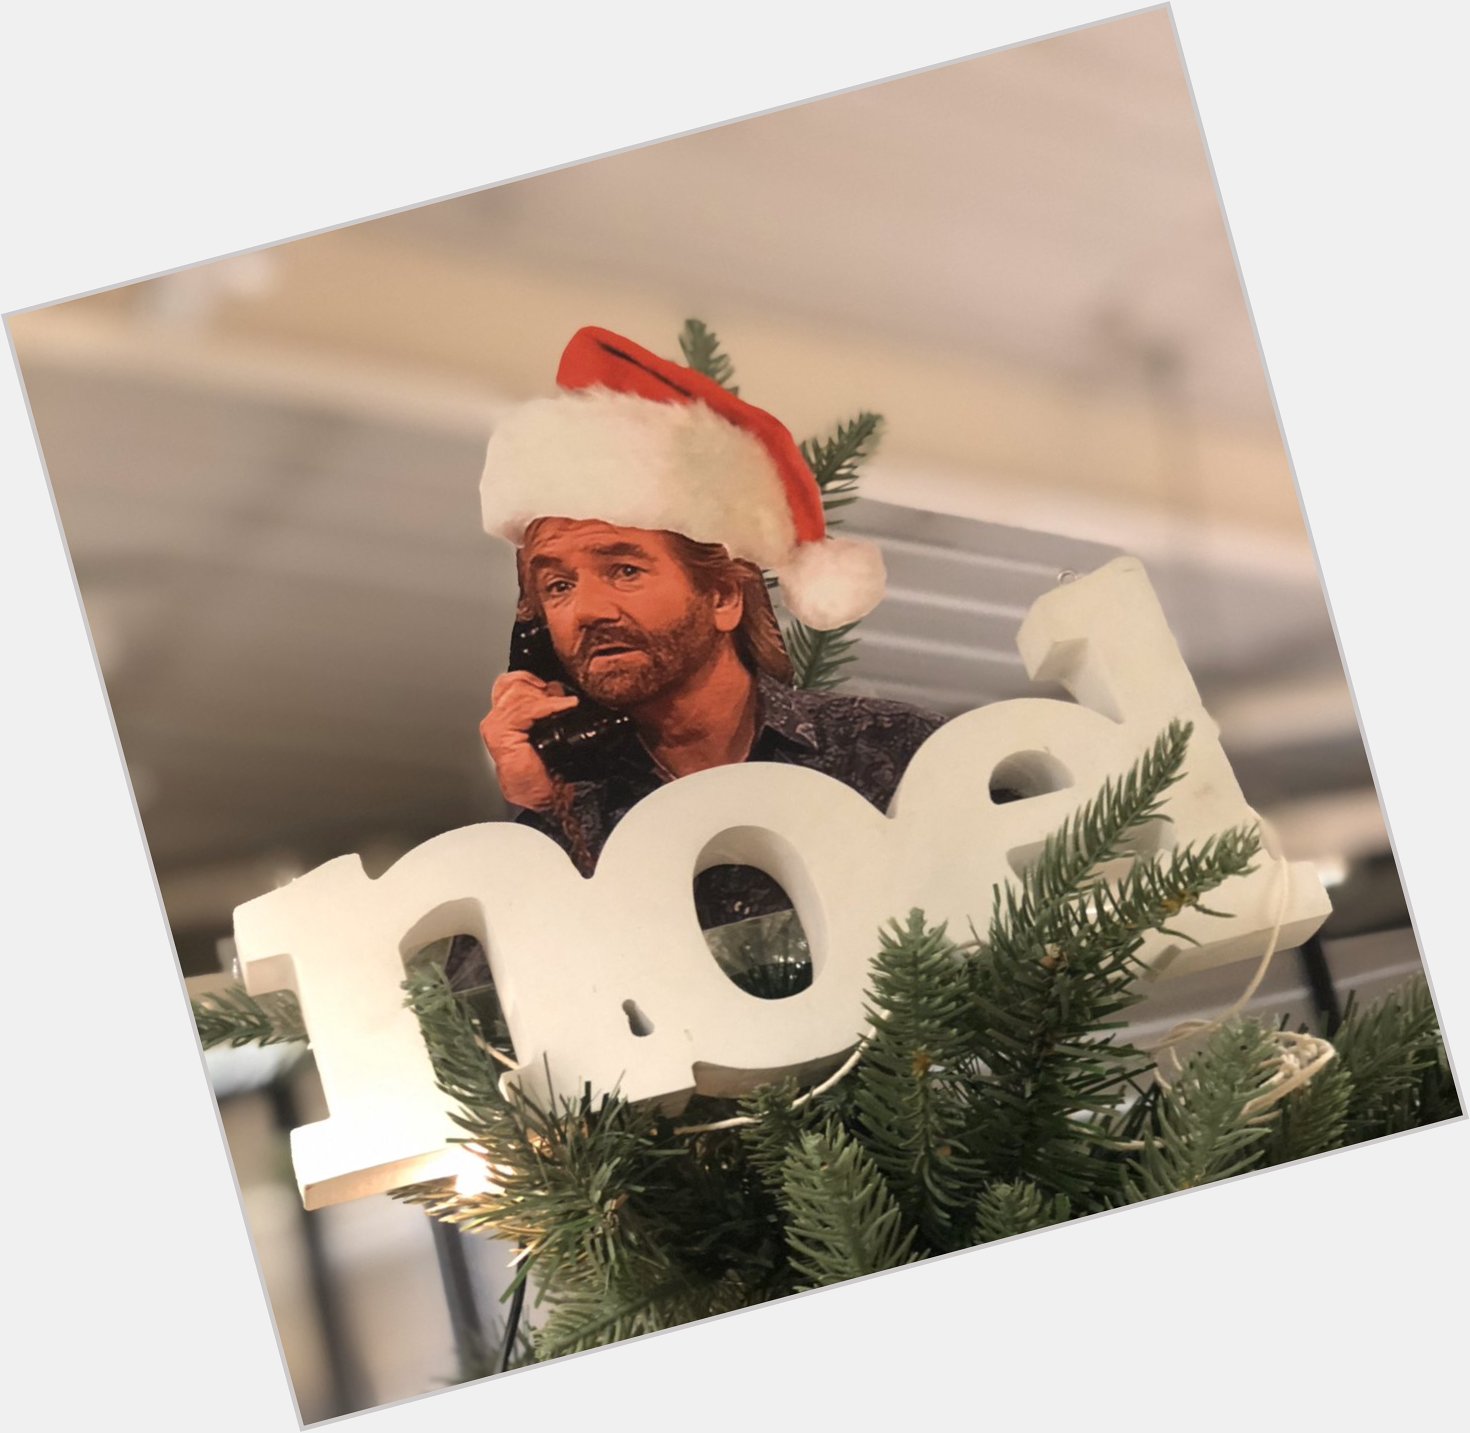 Happy 71st Birthday to Noel Edmonds ... always the star on our office Christmas tree! 